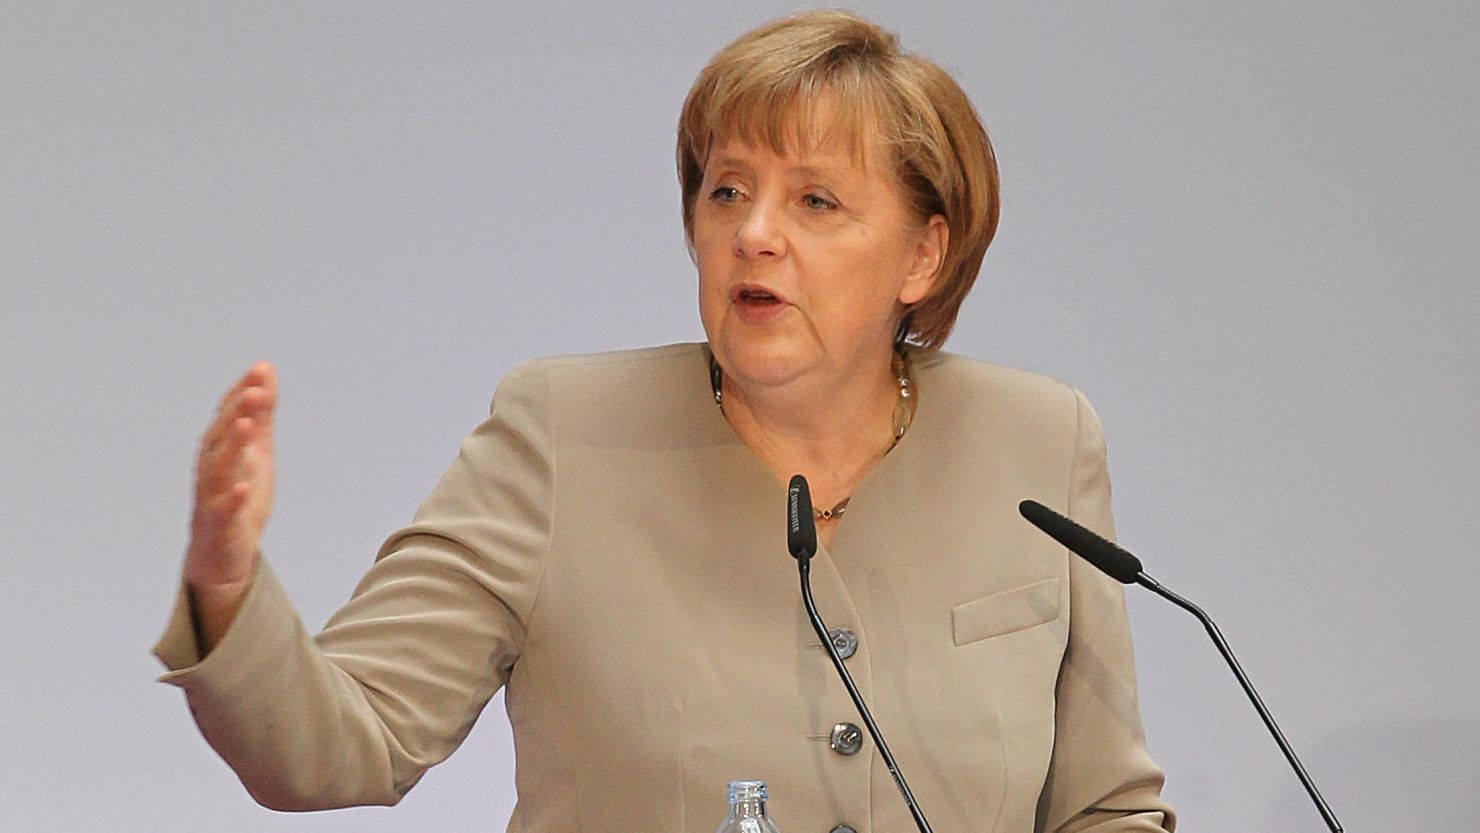 German Chancellor Angela Merkel's coalition government suffered a blow in weekend elections.